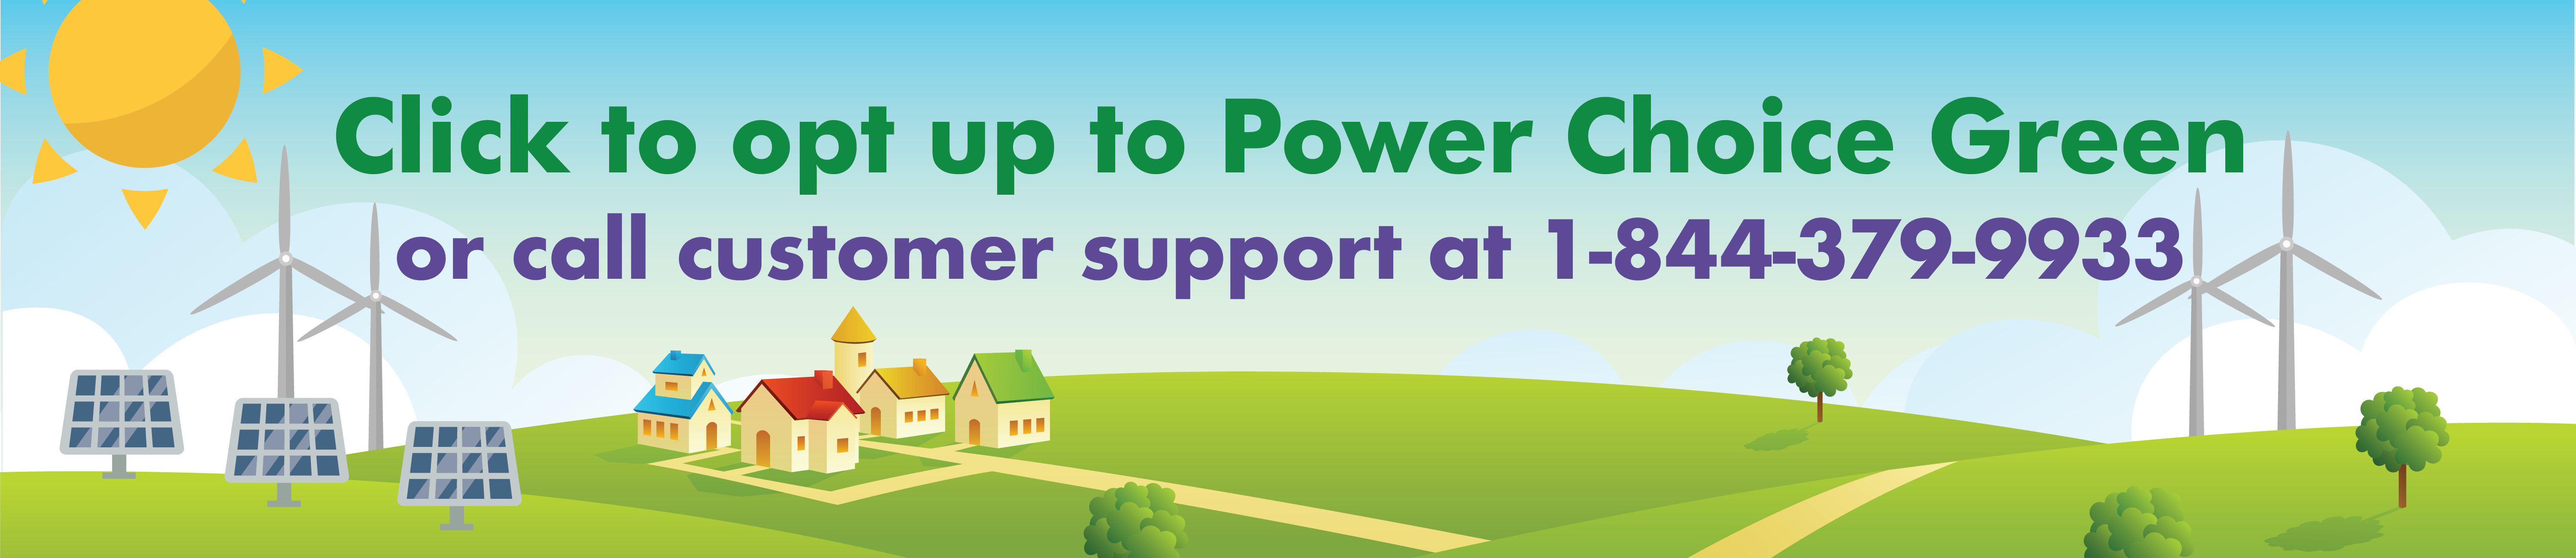 Click to opt up to Power Choice Green or call customer support at 1-844-379-9933